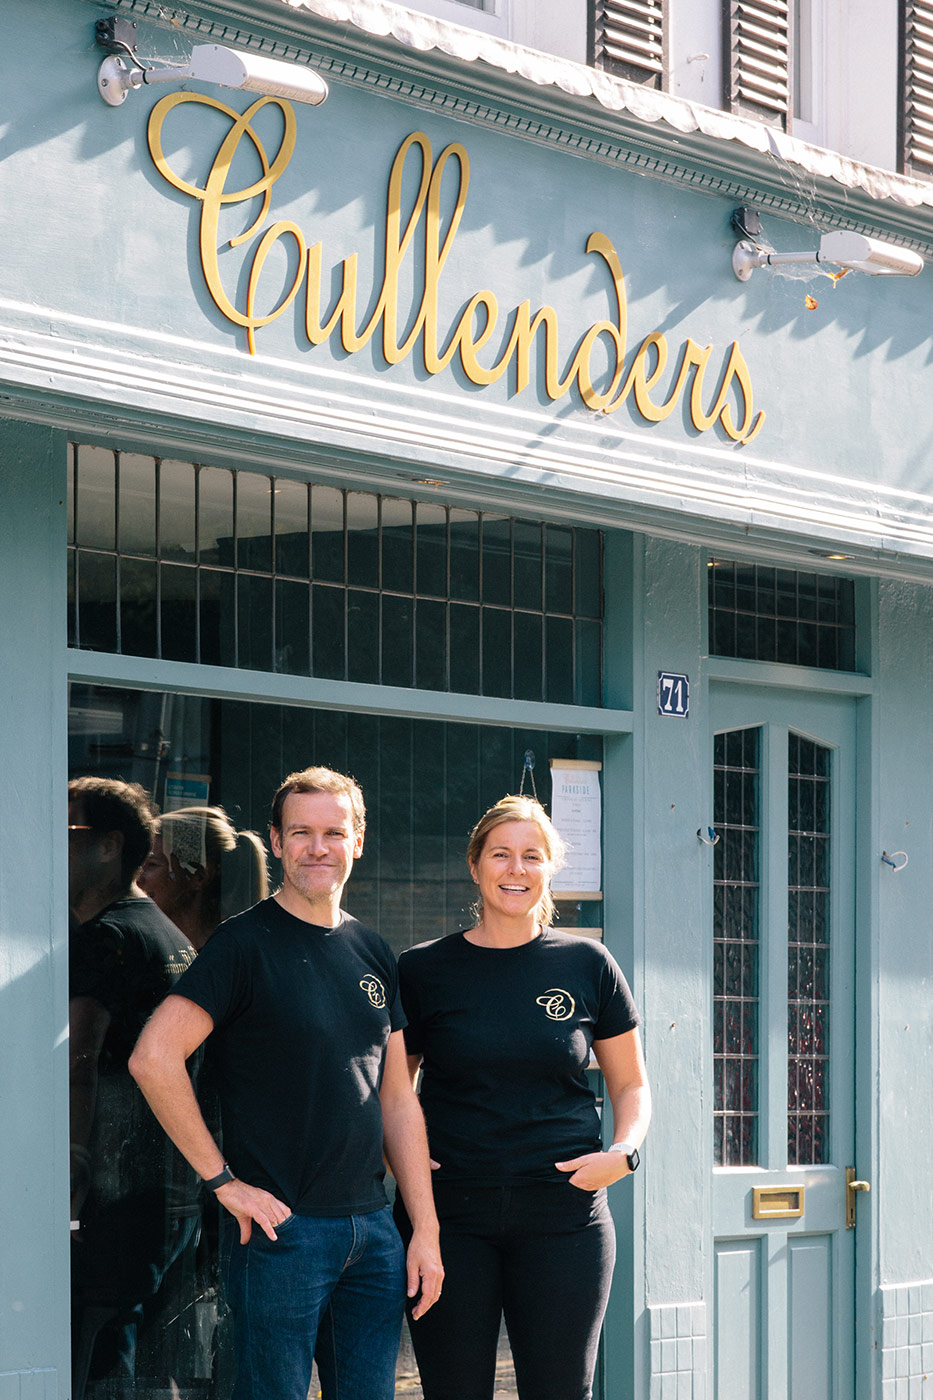 Cullenders Parkside- Our Story